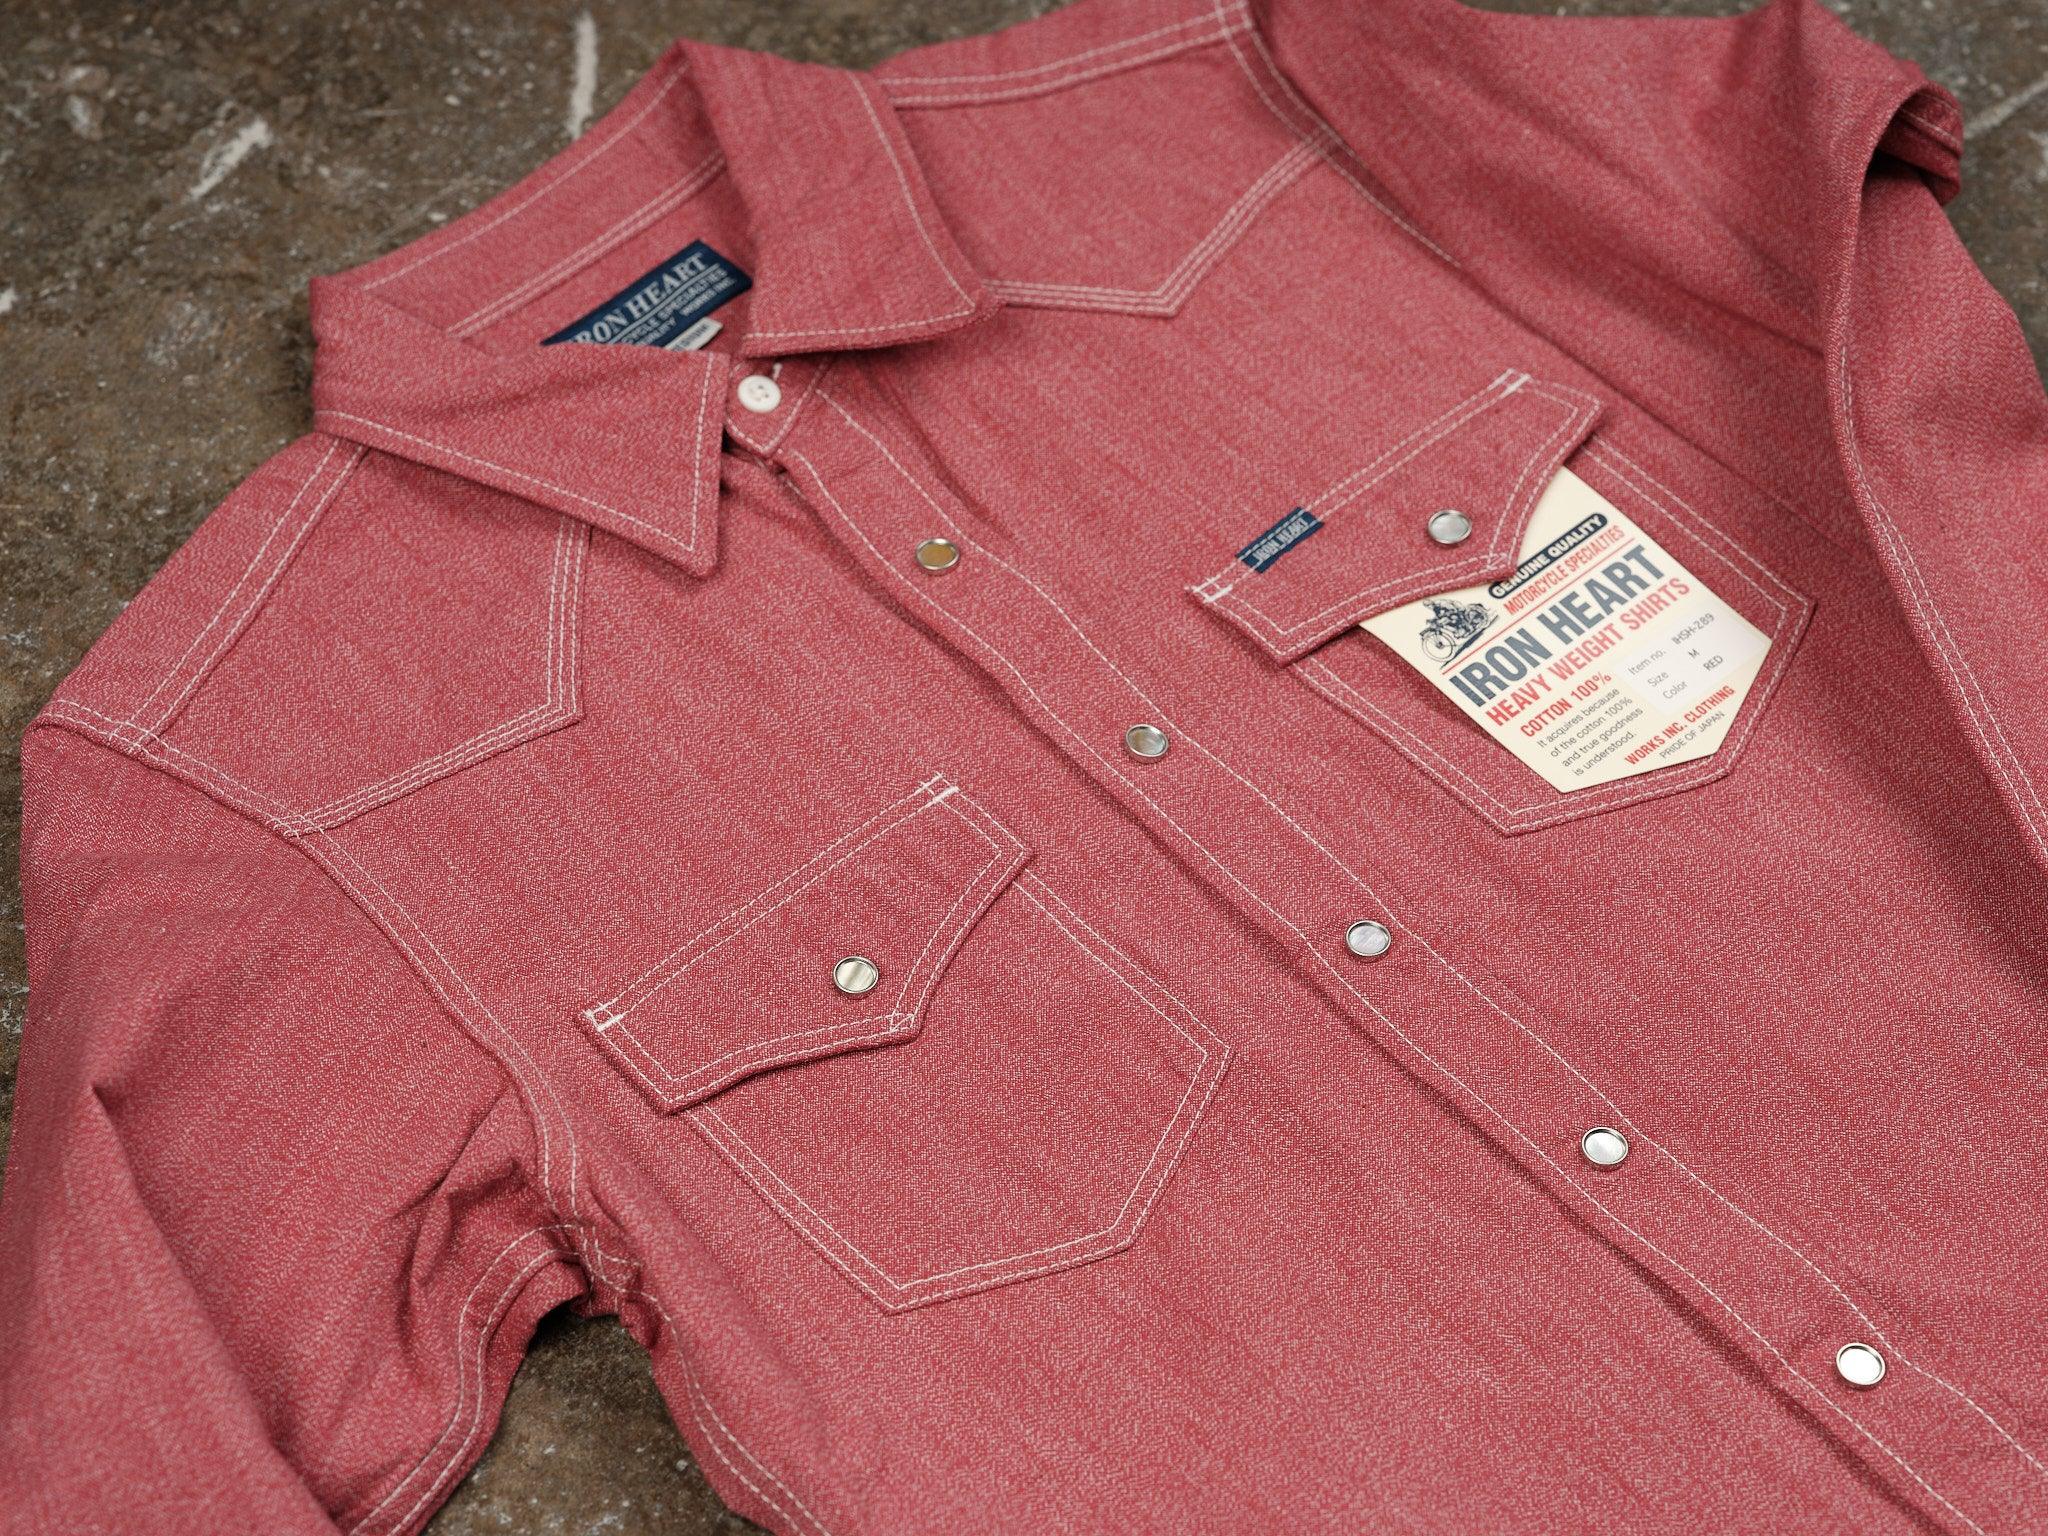 IHSH-289-RED - 10oz Mock Twist Selvedge Chambray Western Shirt - Red 'The Salt and Cayenne' - Guilty Party